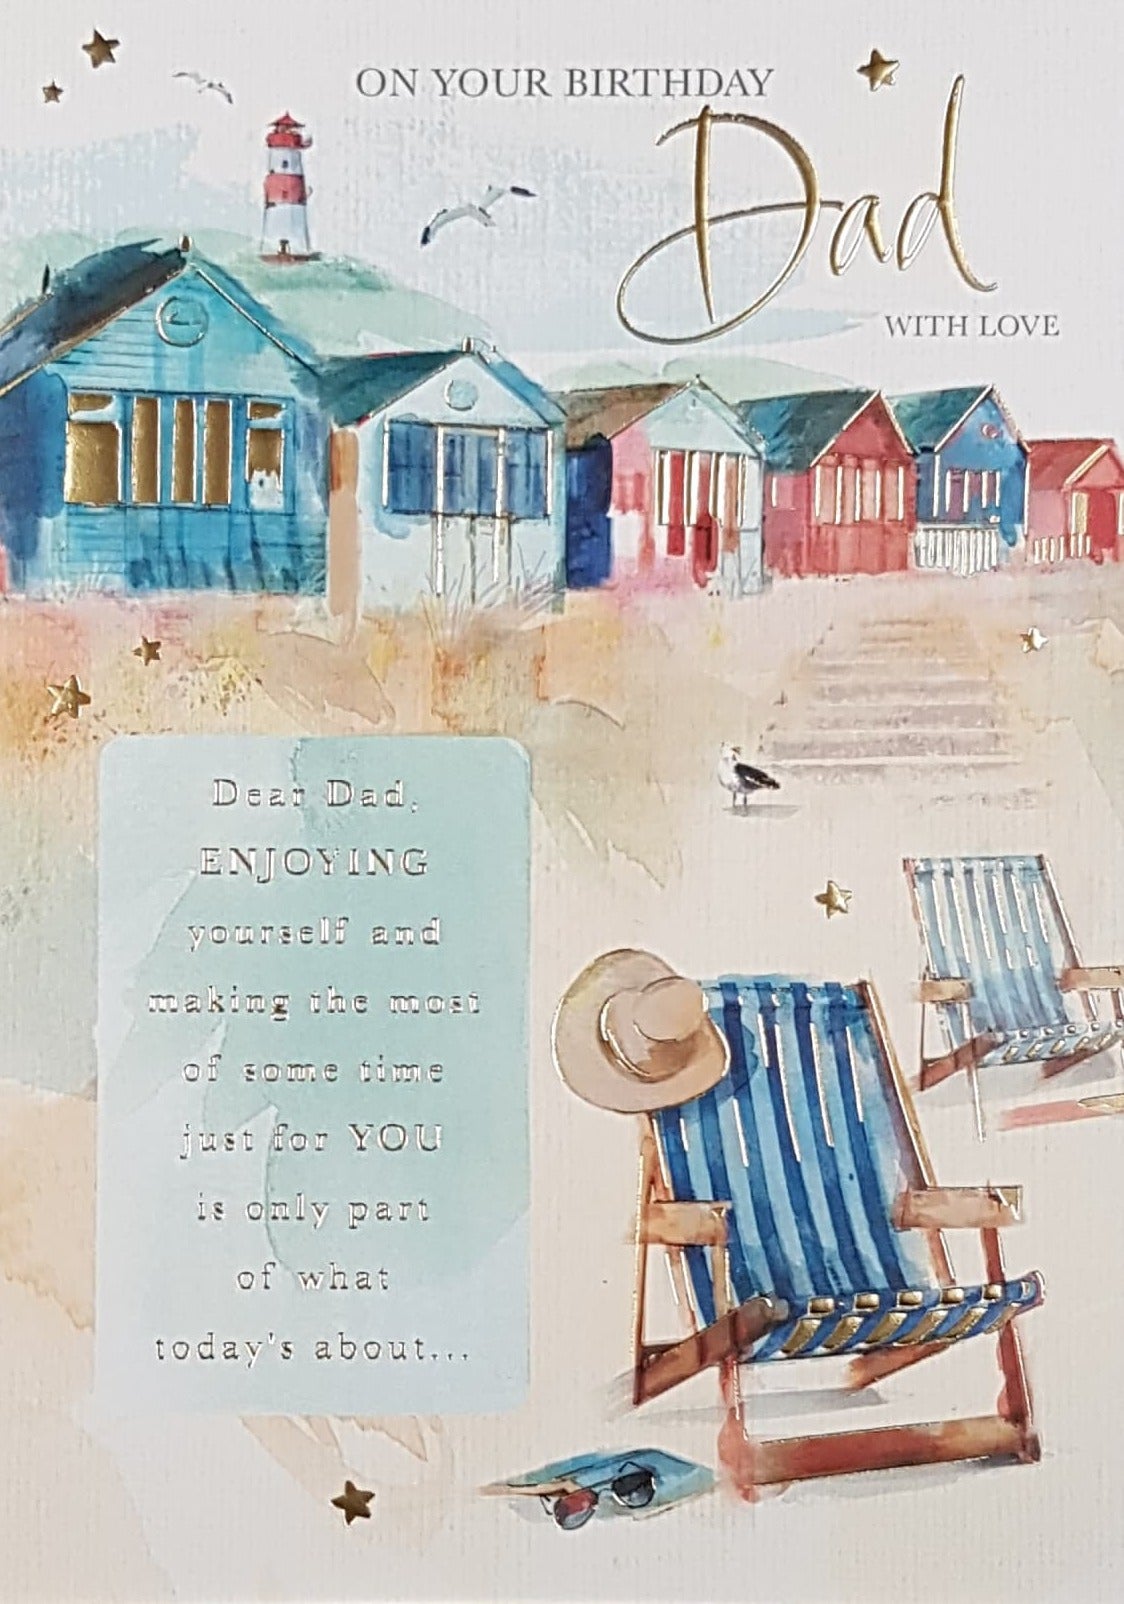 Birthday Card - Dad / A Nice Message For Dad & Blue Beach Chairs